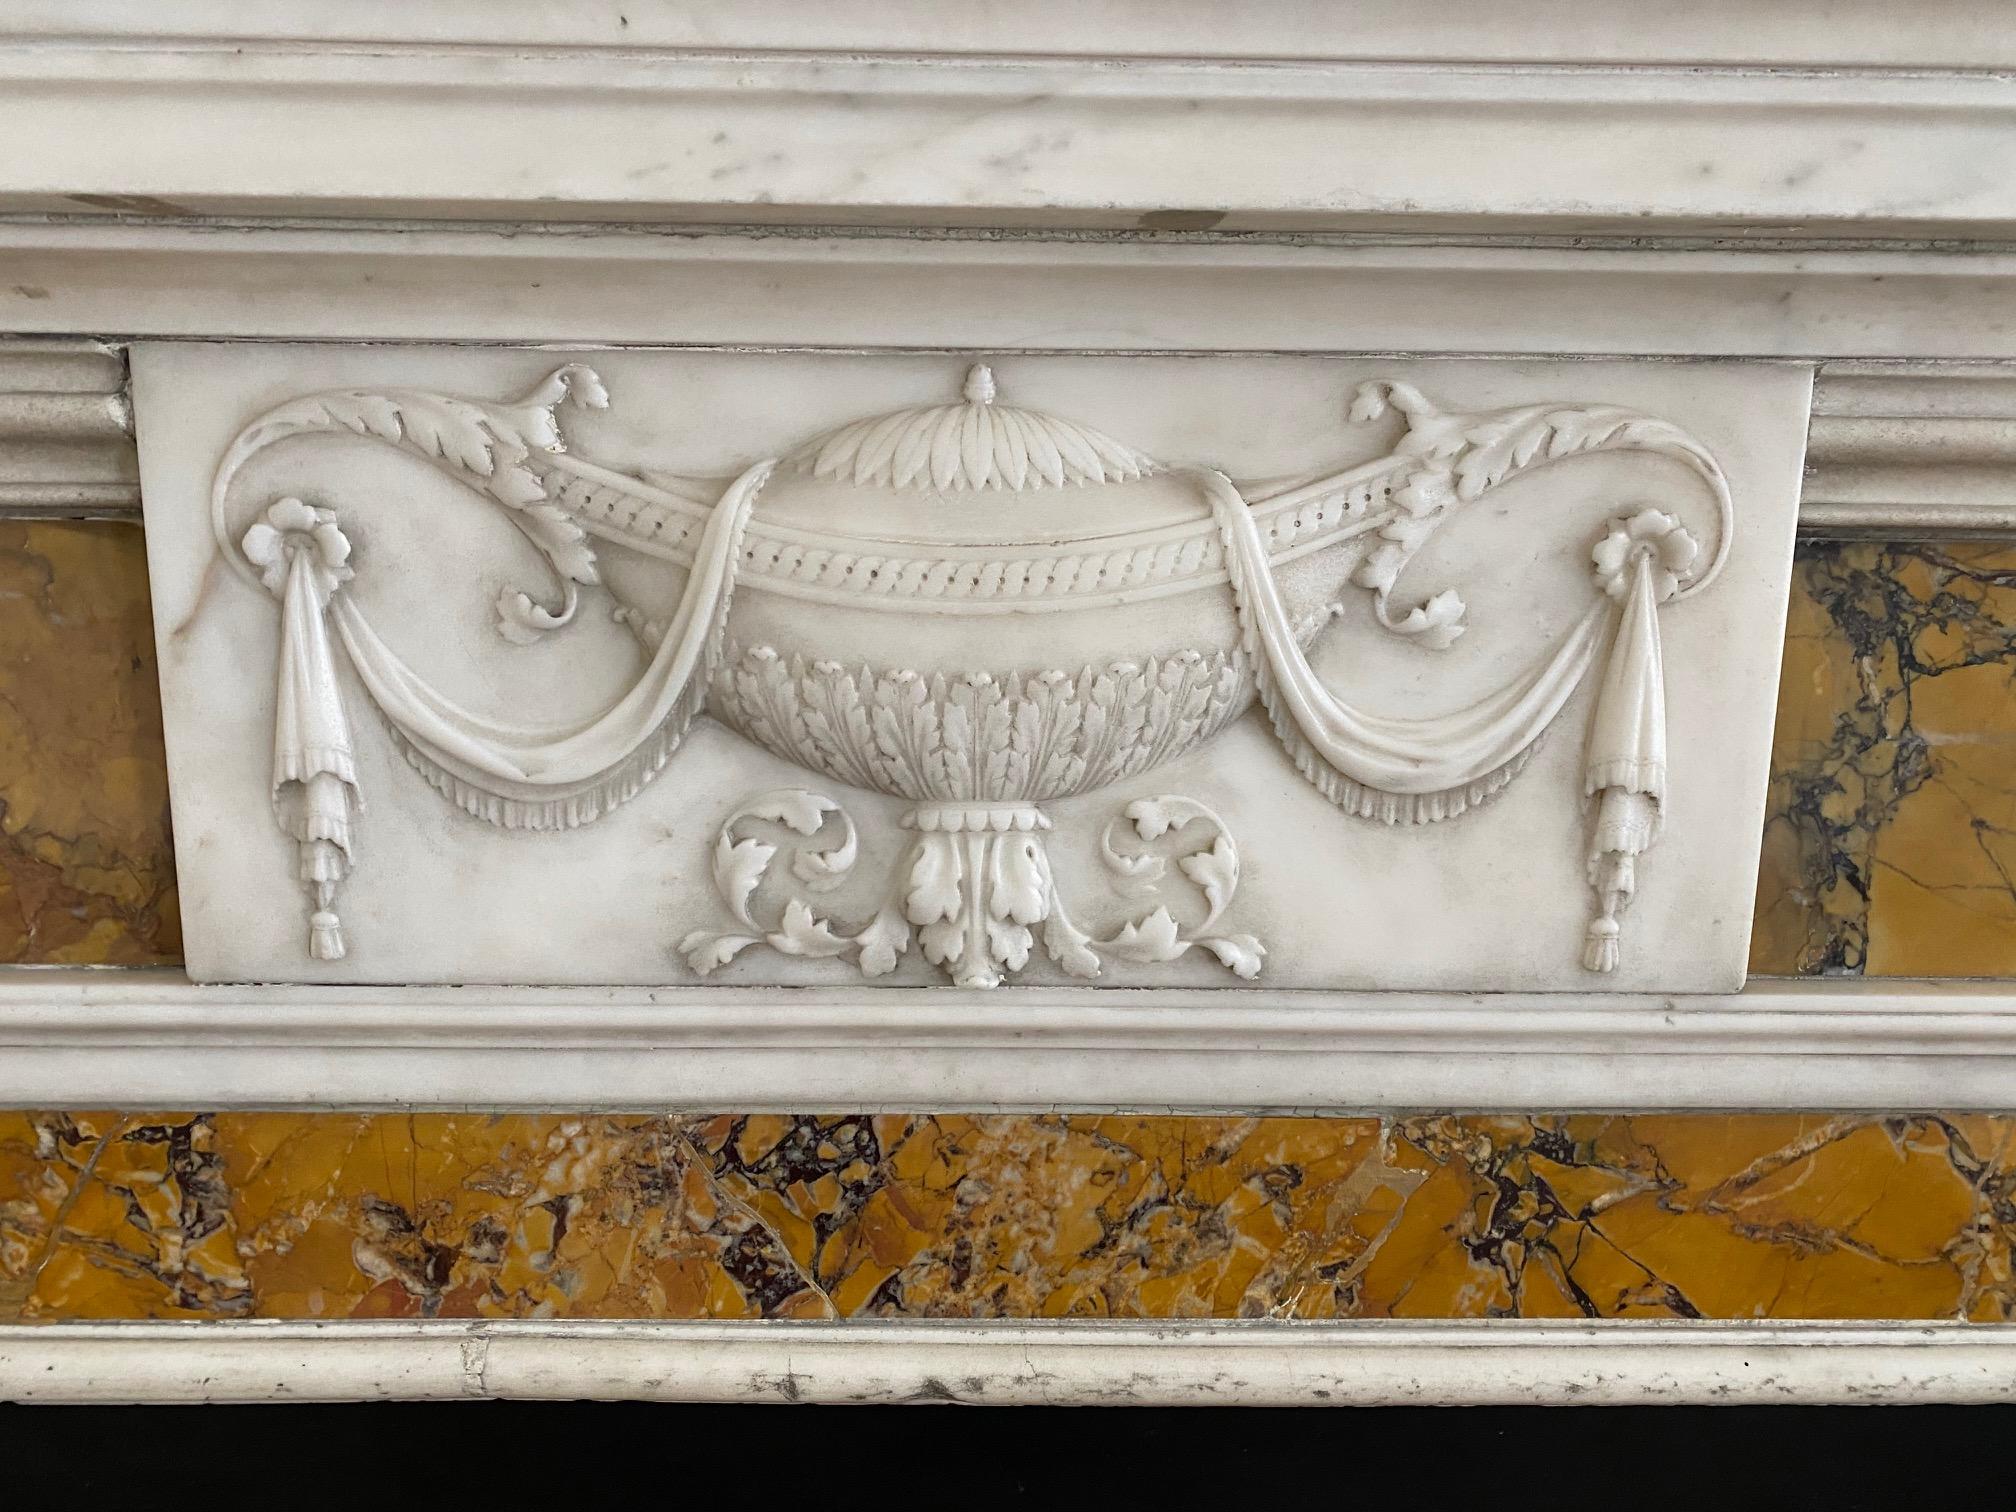 Late 18th Century Important Neo-Classical Georgian Period White Statuary and Siena Marble Mantel For Sale